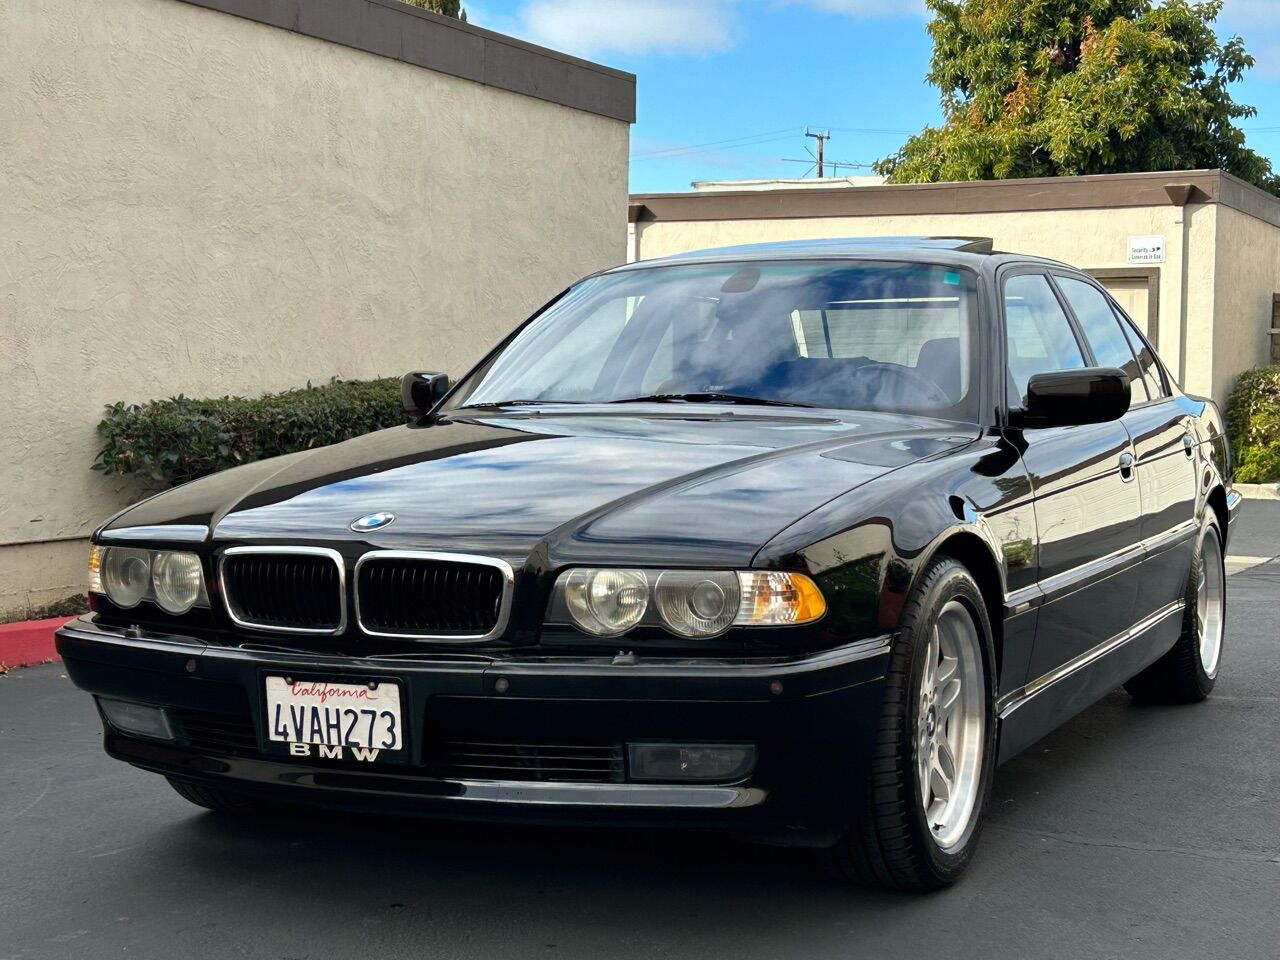 2001 BMW 7 Series For Sale - Carsforsale.com®